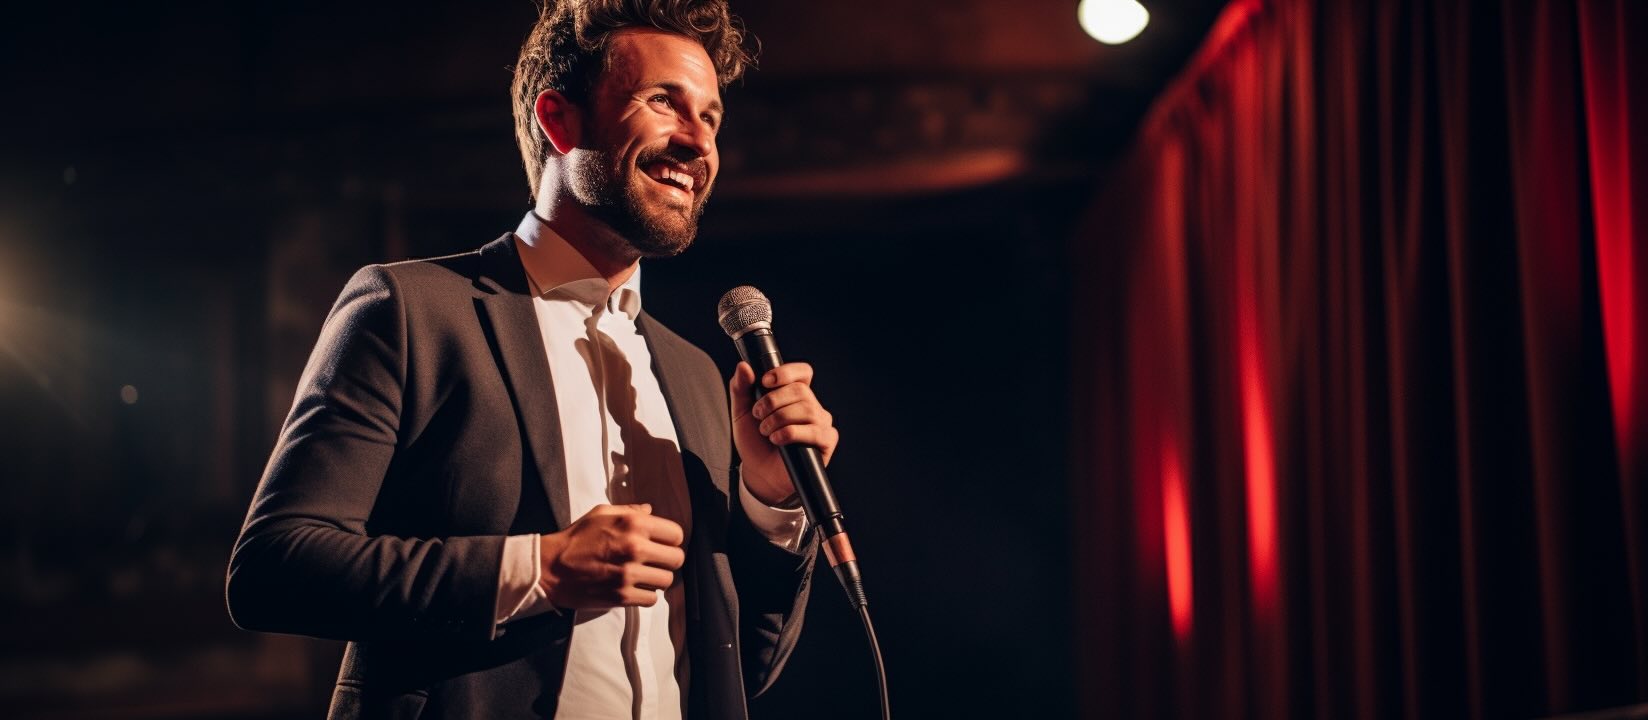 Cheap Tickets to Hilarious Stand-Up Shows